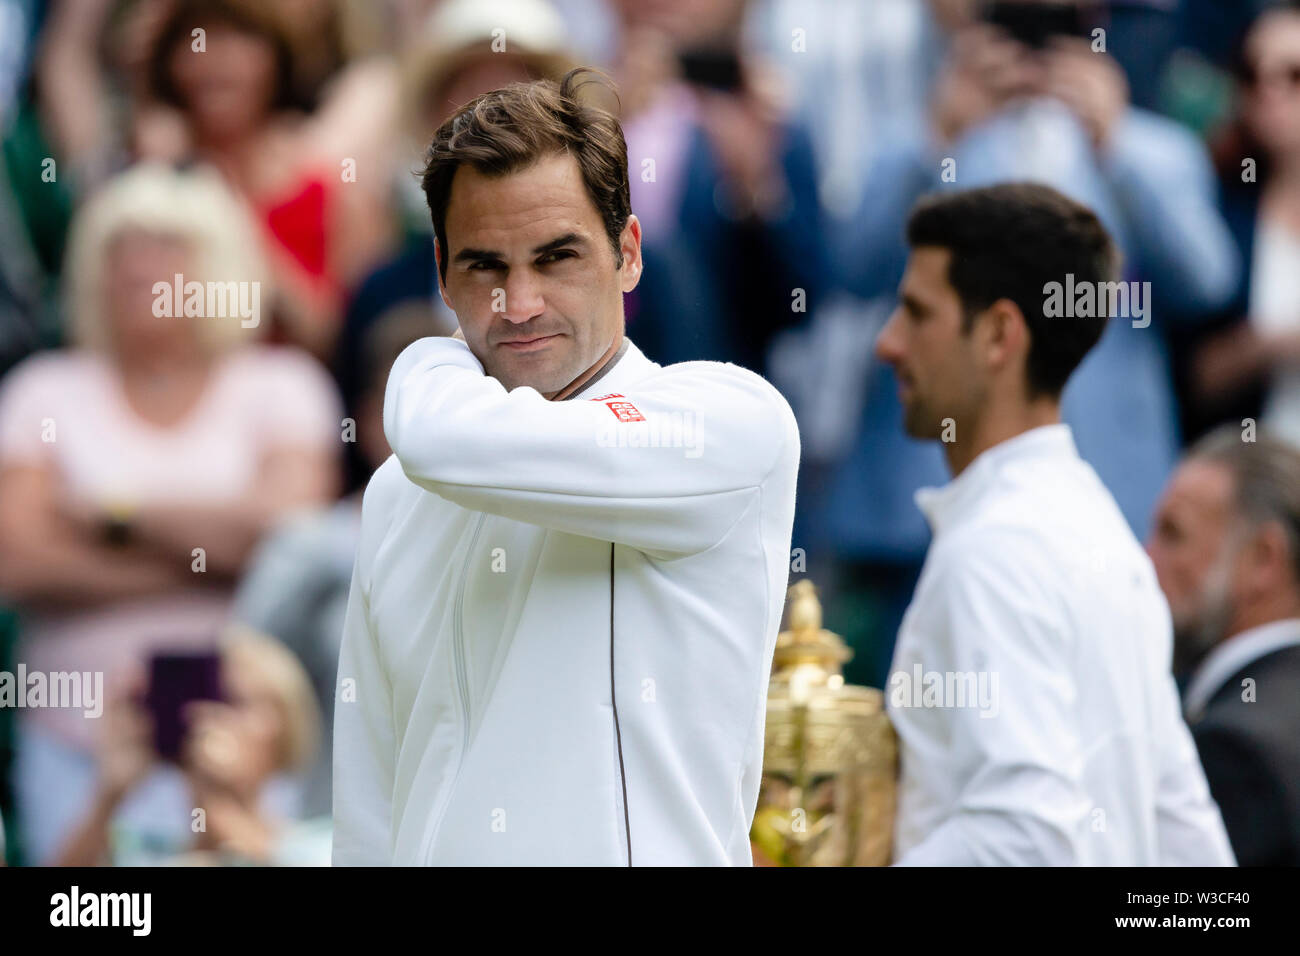 London, UK, 14th July 2019: Roger Federer from Switzerland is in action during the 2019 Wimbledon Men's Final at the All England Lawn Tennis and Croquet Club in London. Credit: Frank Molter/Alamy Live news Stock Photo